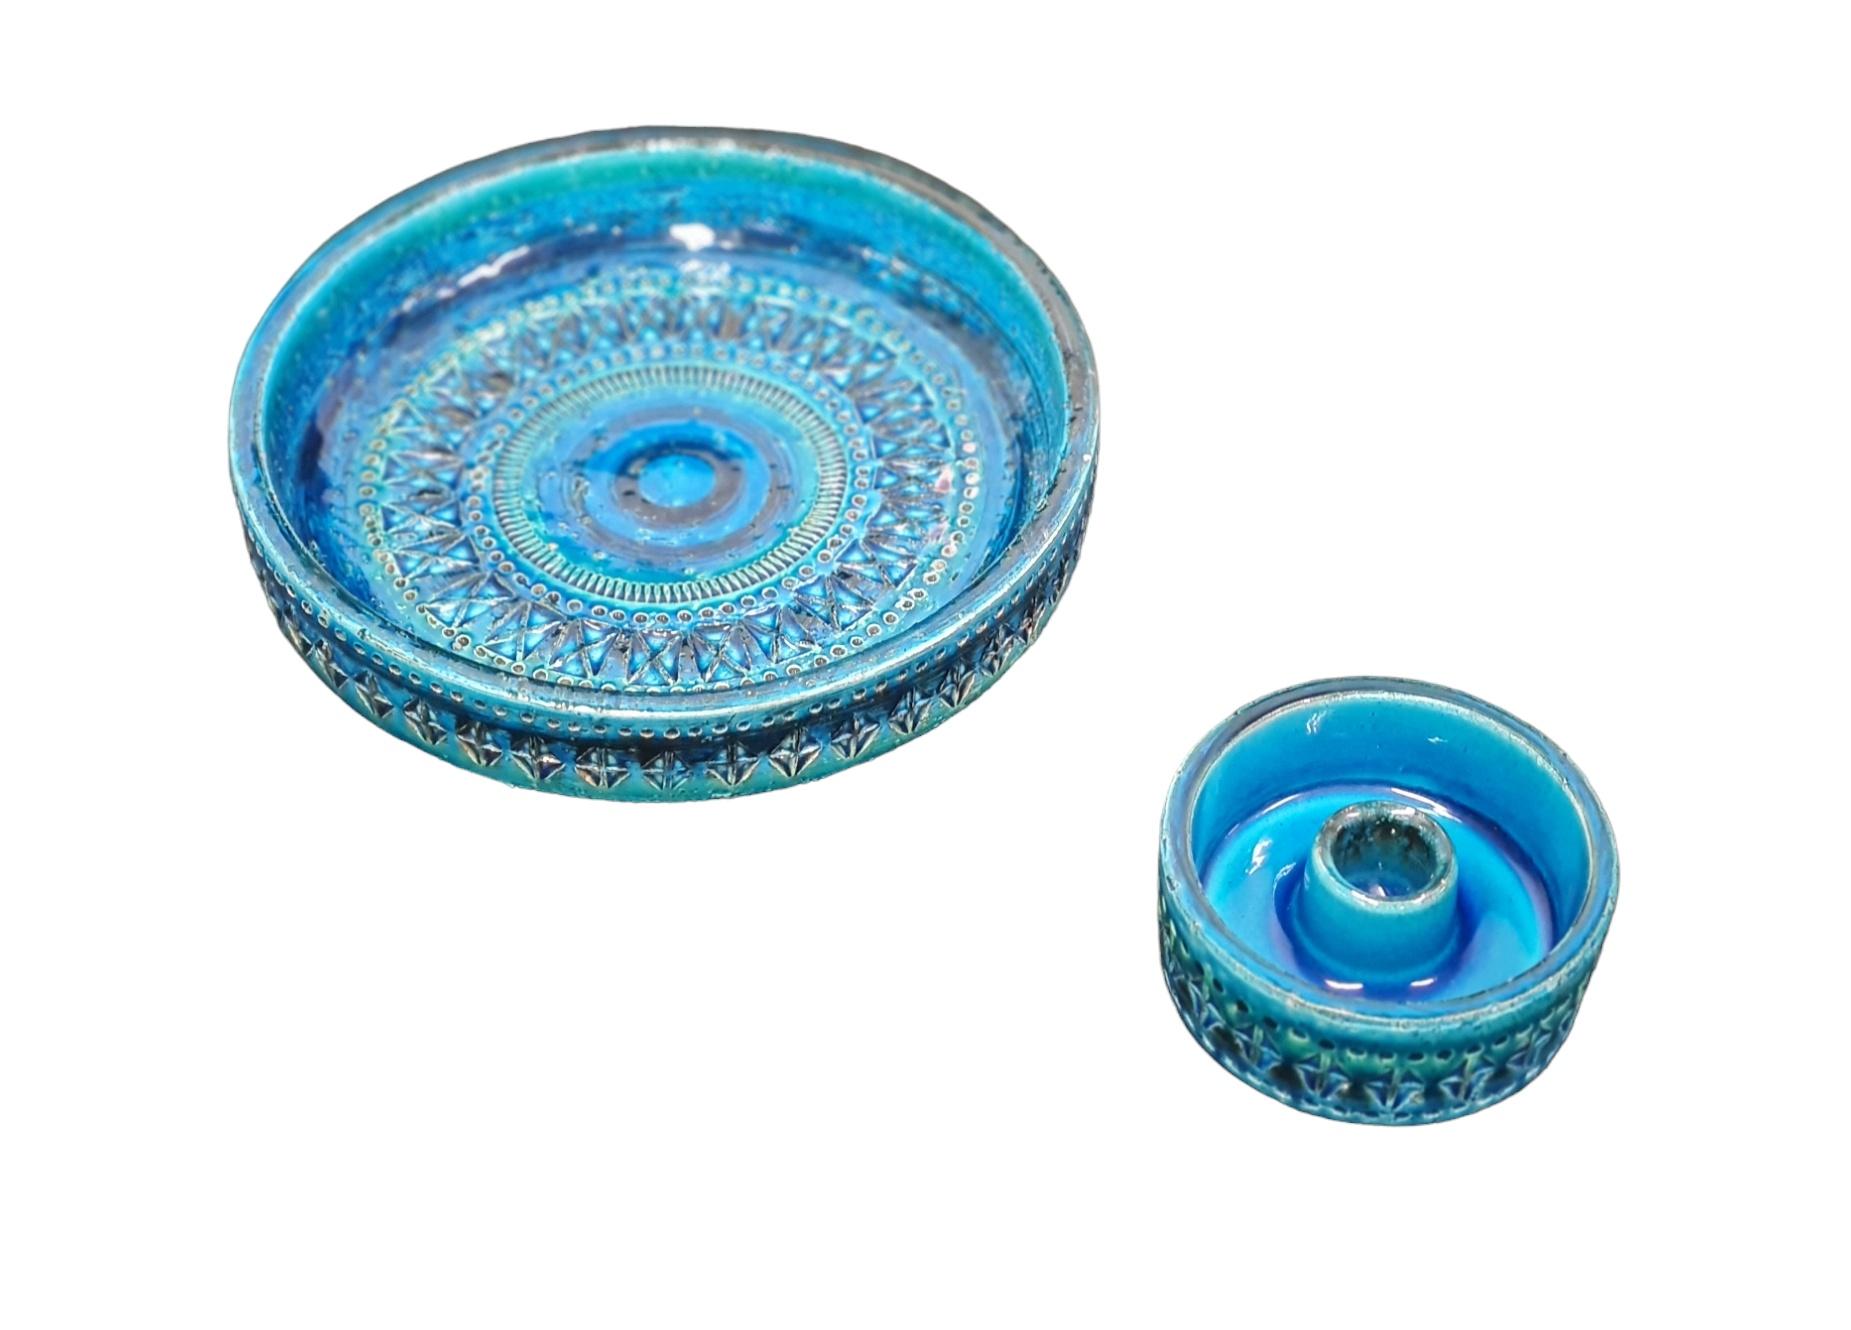 A beautiful set of two blue Bitossi pieces. A bowl of 22cm diameter and 5.5cm high and a candleholder with a diameter or 10cm and 4 high. 
Both pieces are in beautiful condition.